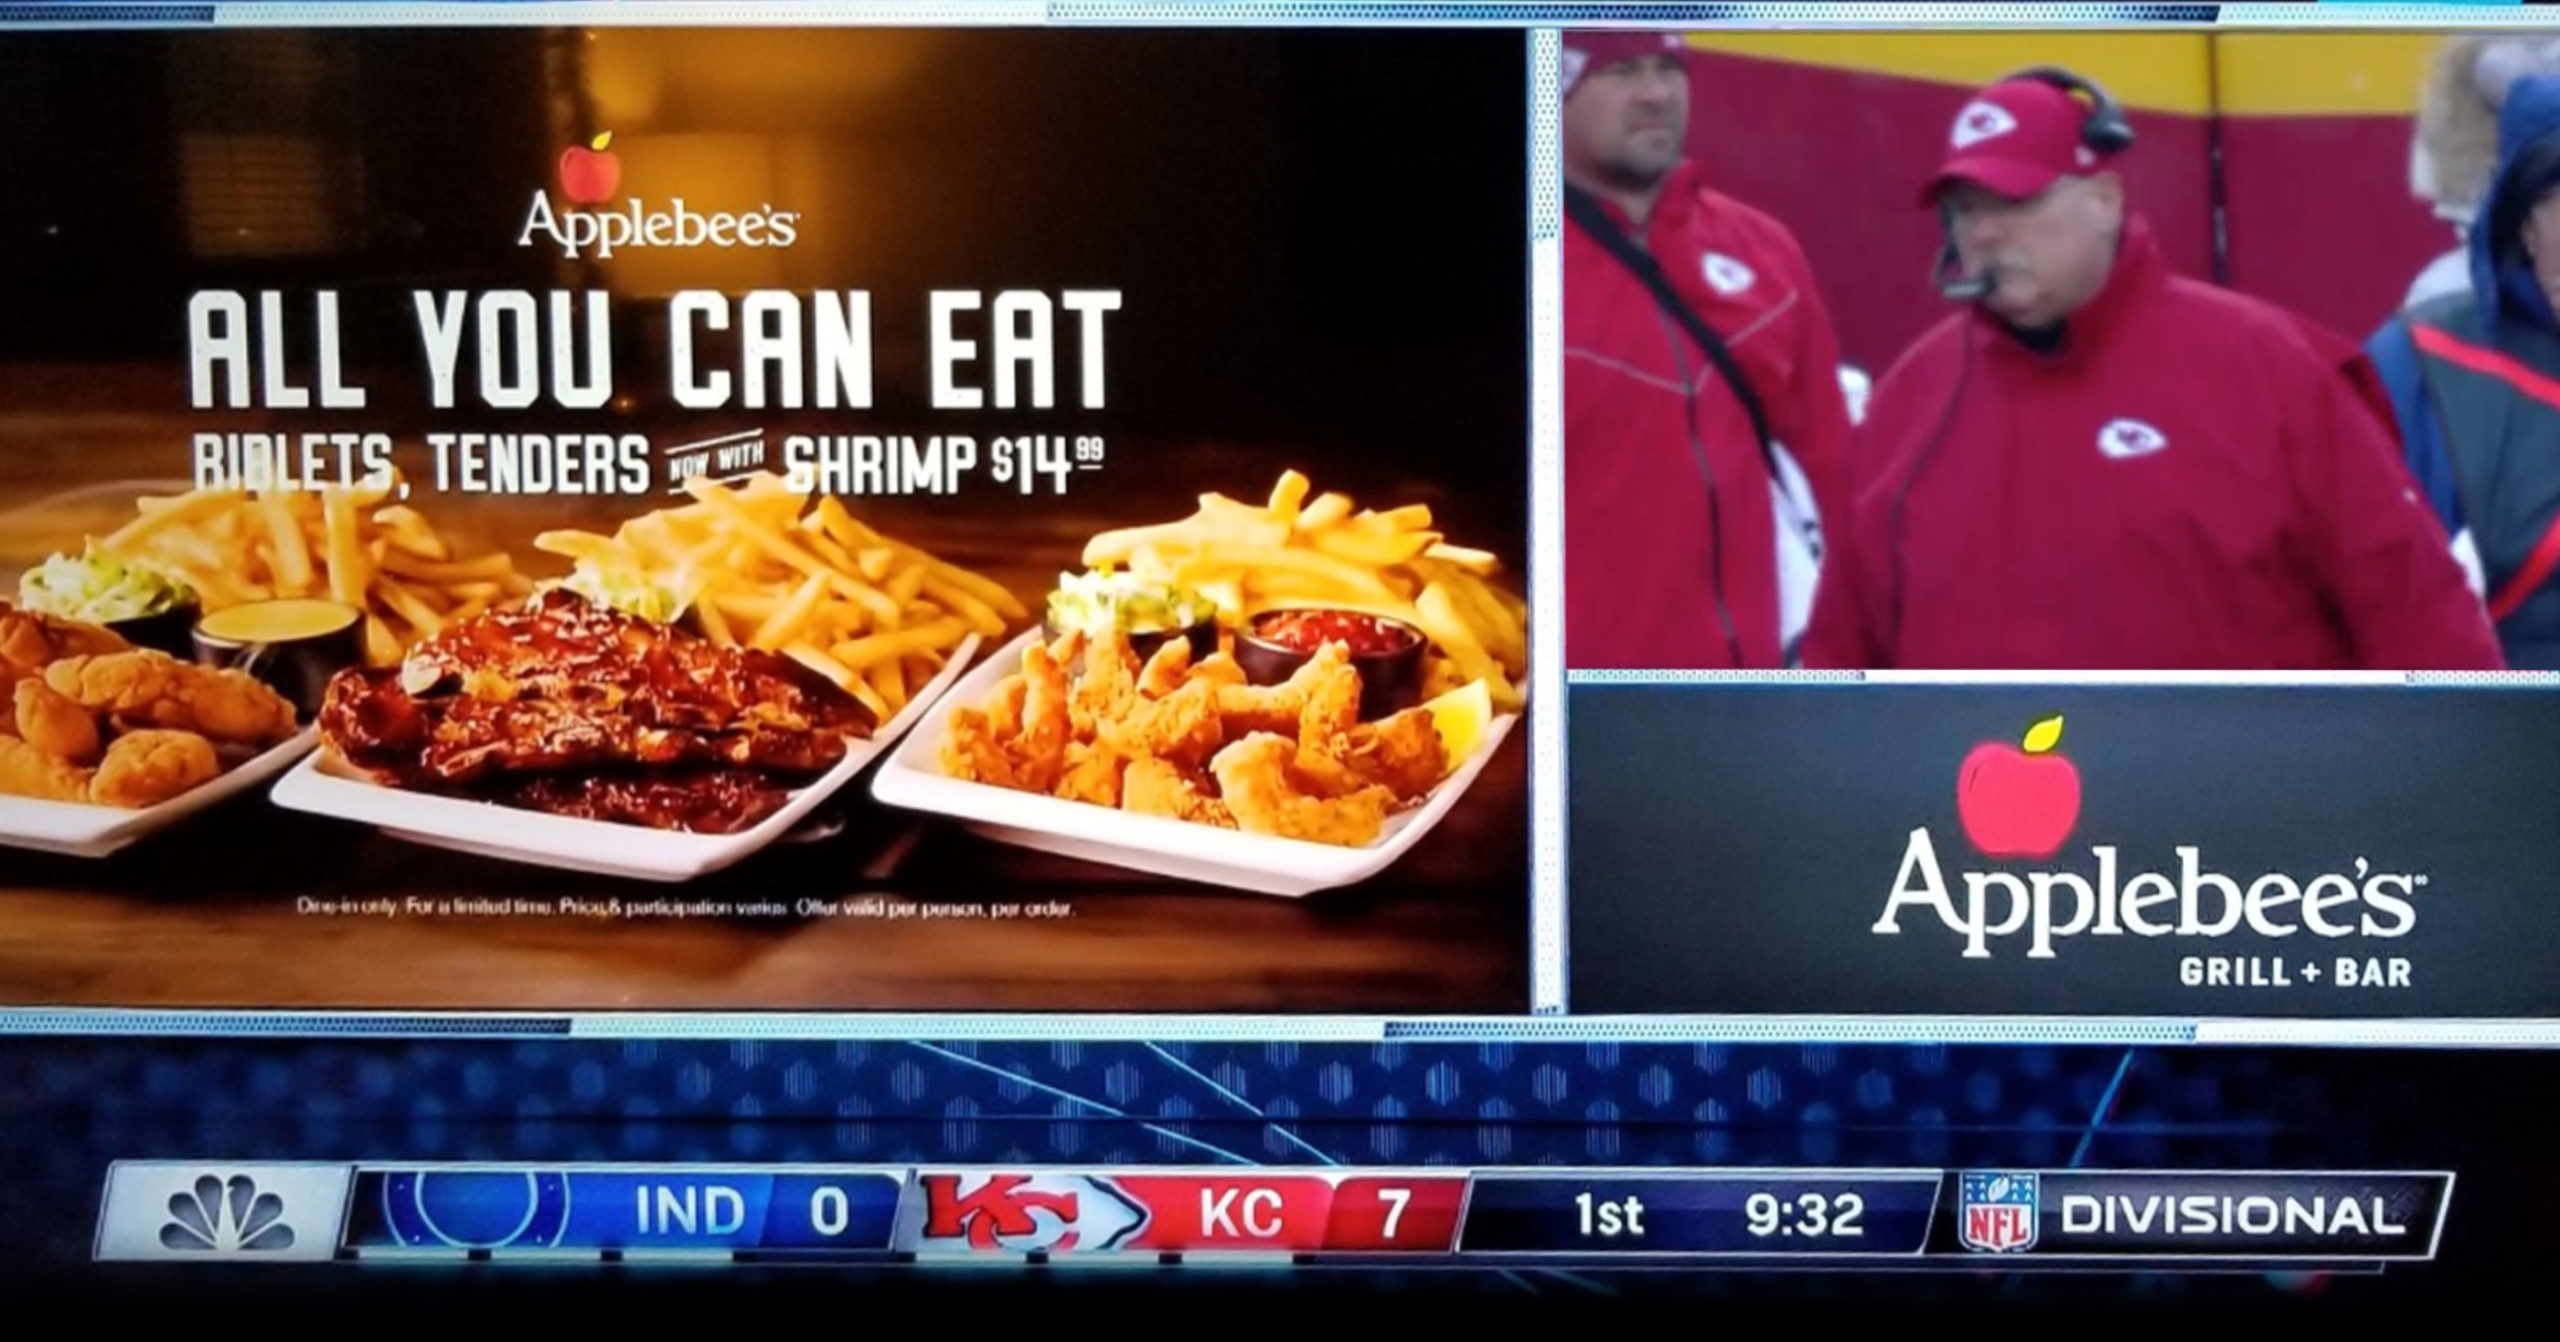 NBC Hilariously Aires ‘All You Can Eat’ Applebee’s Commercial With Andy